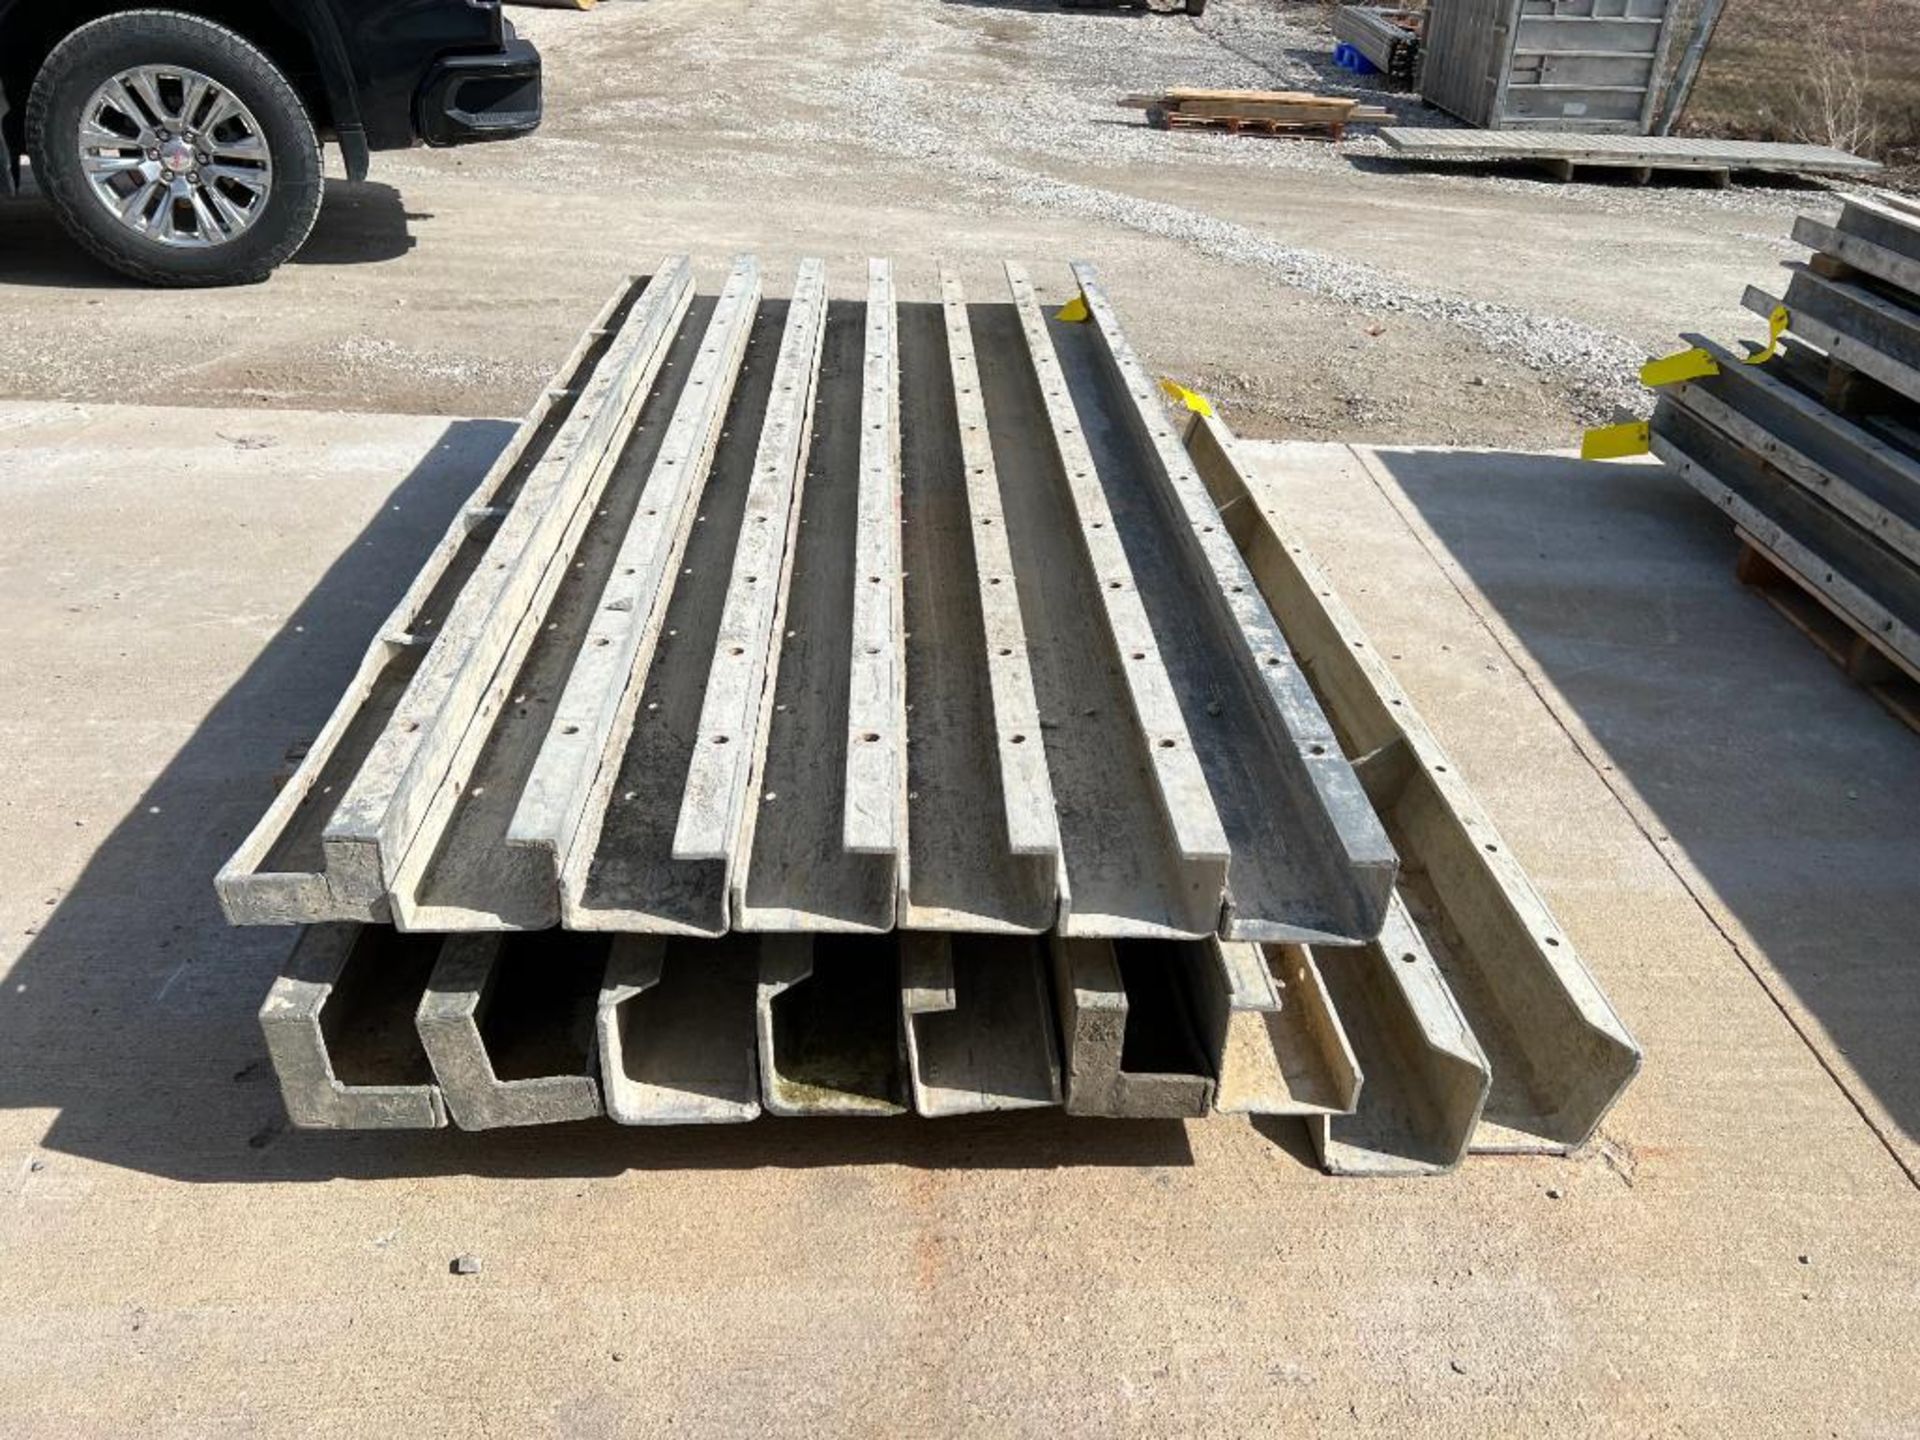 (9) 6" x 6" x 8' ISC Full Smooth Wall Ties Aluminum Concrete Forms, 8" Hole Pattern. Located in Mt. - Image 2 of 3